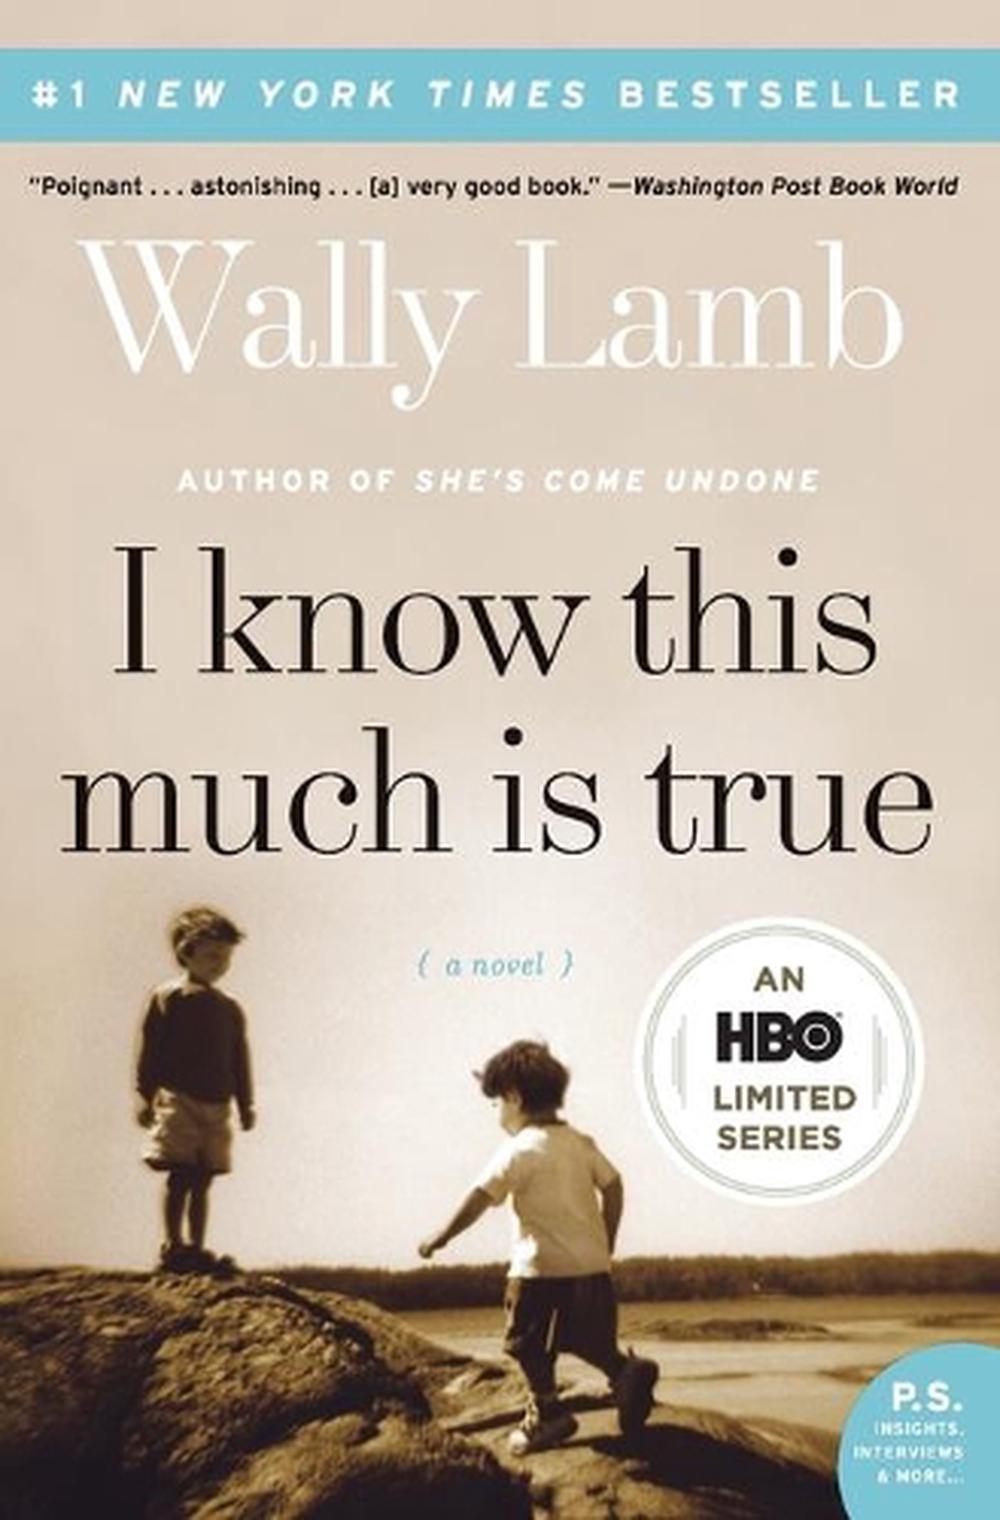 I Know This Much Is True: A Novel by Wally Lamb (English) Paperback Book Free Sh 9780061469084 ...